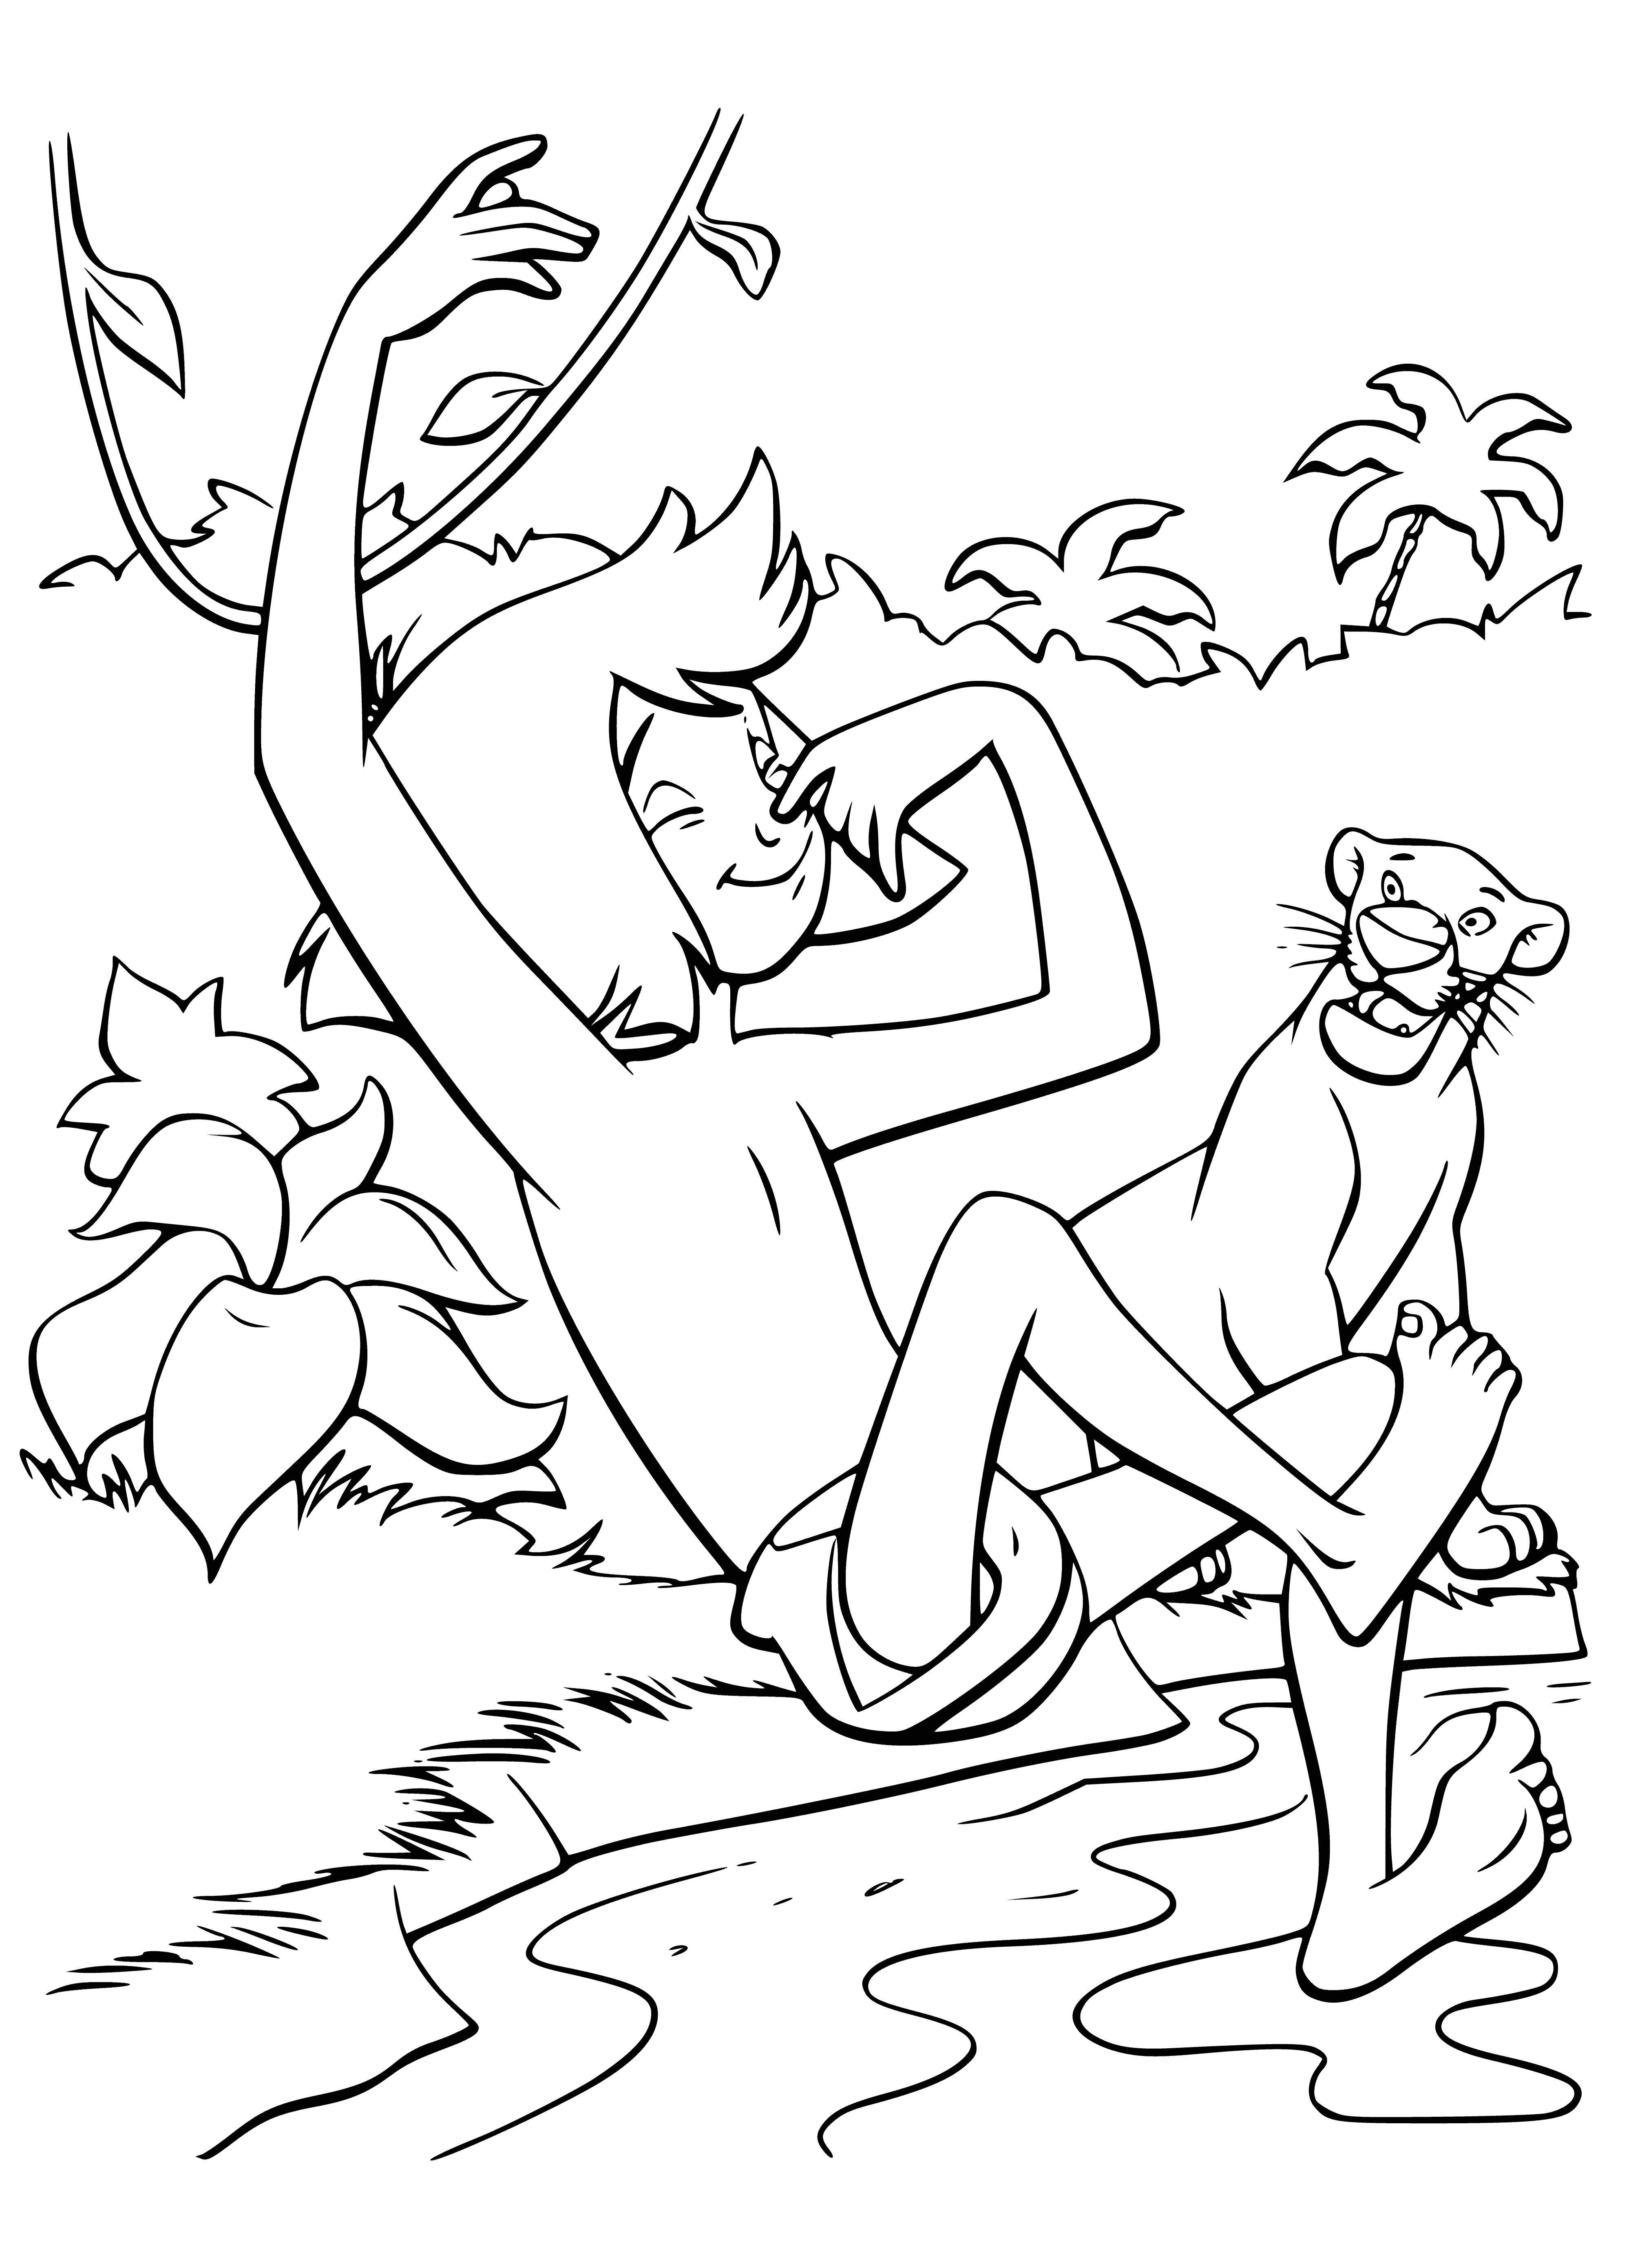 coloring page: Mowgli dives off a cliff into a river, wearing a loincloth, with a knife in his teeth and wild hair. Ready to make the plunge!